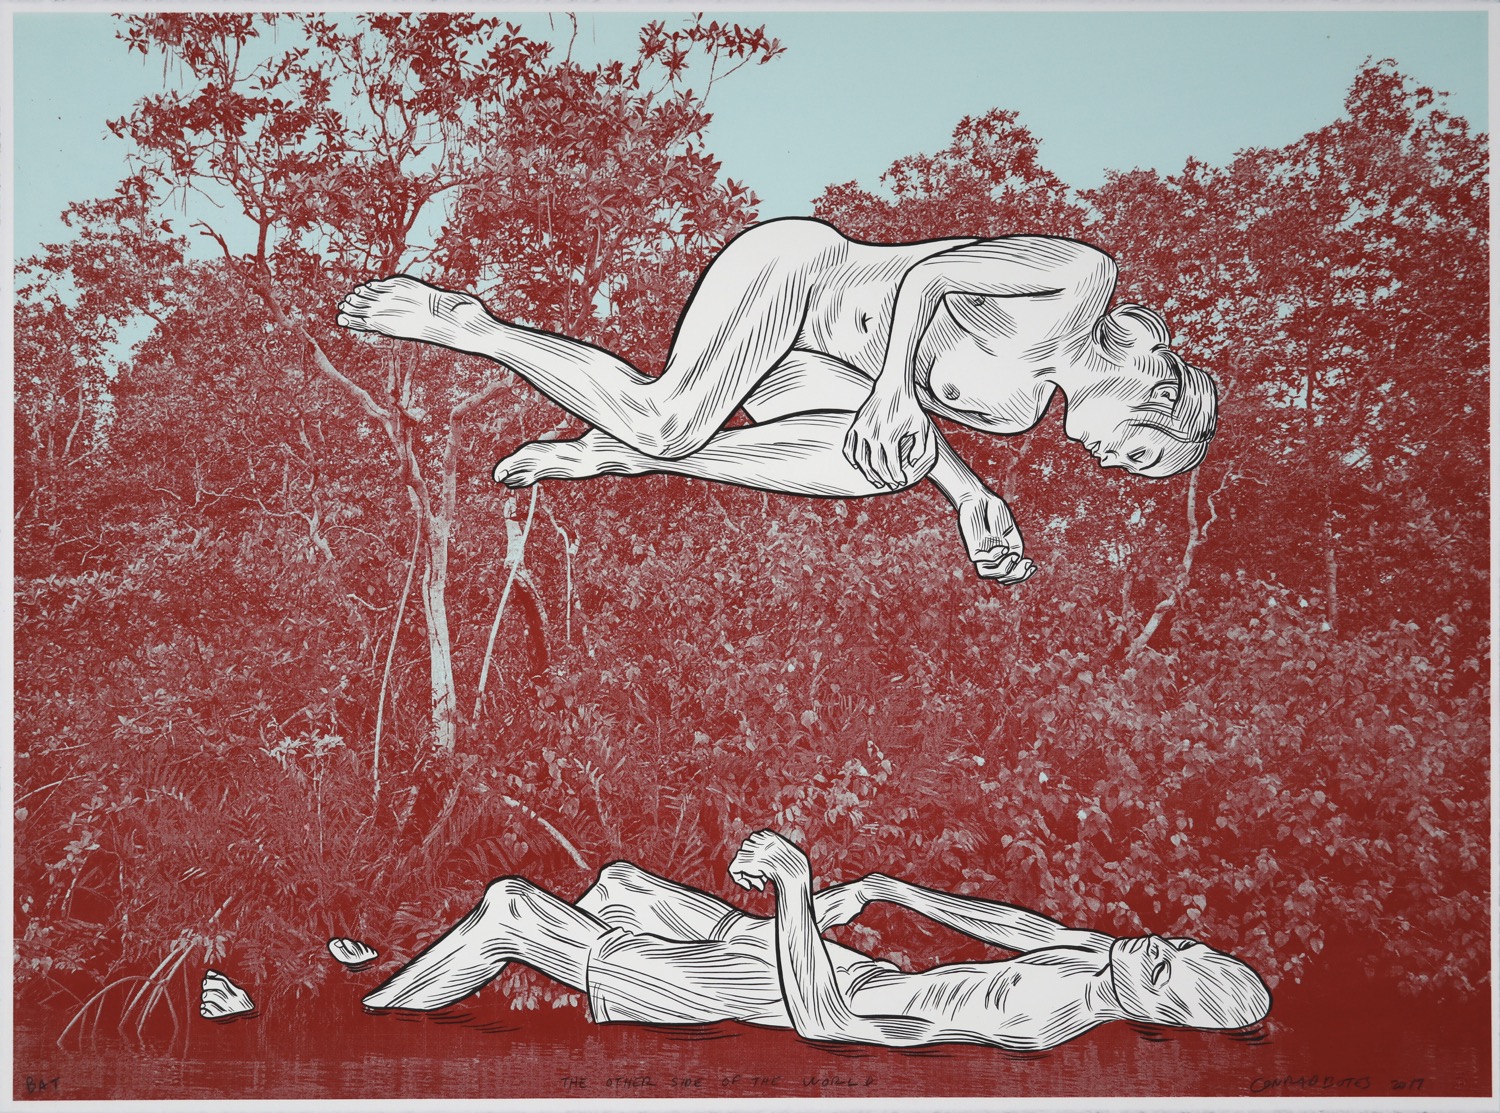 Man floating in water with woman suspended in the air above him with river forest background